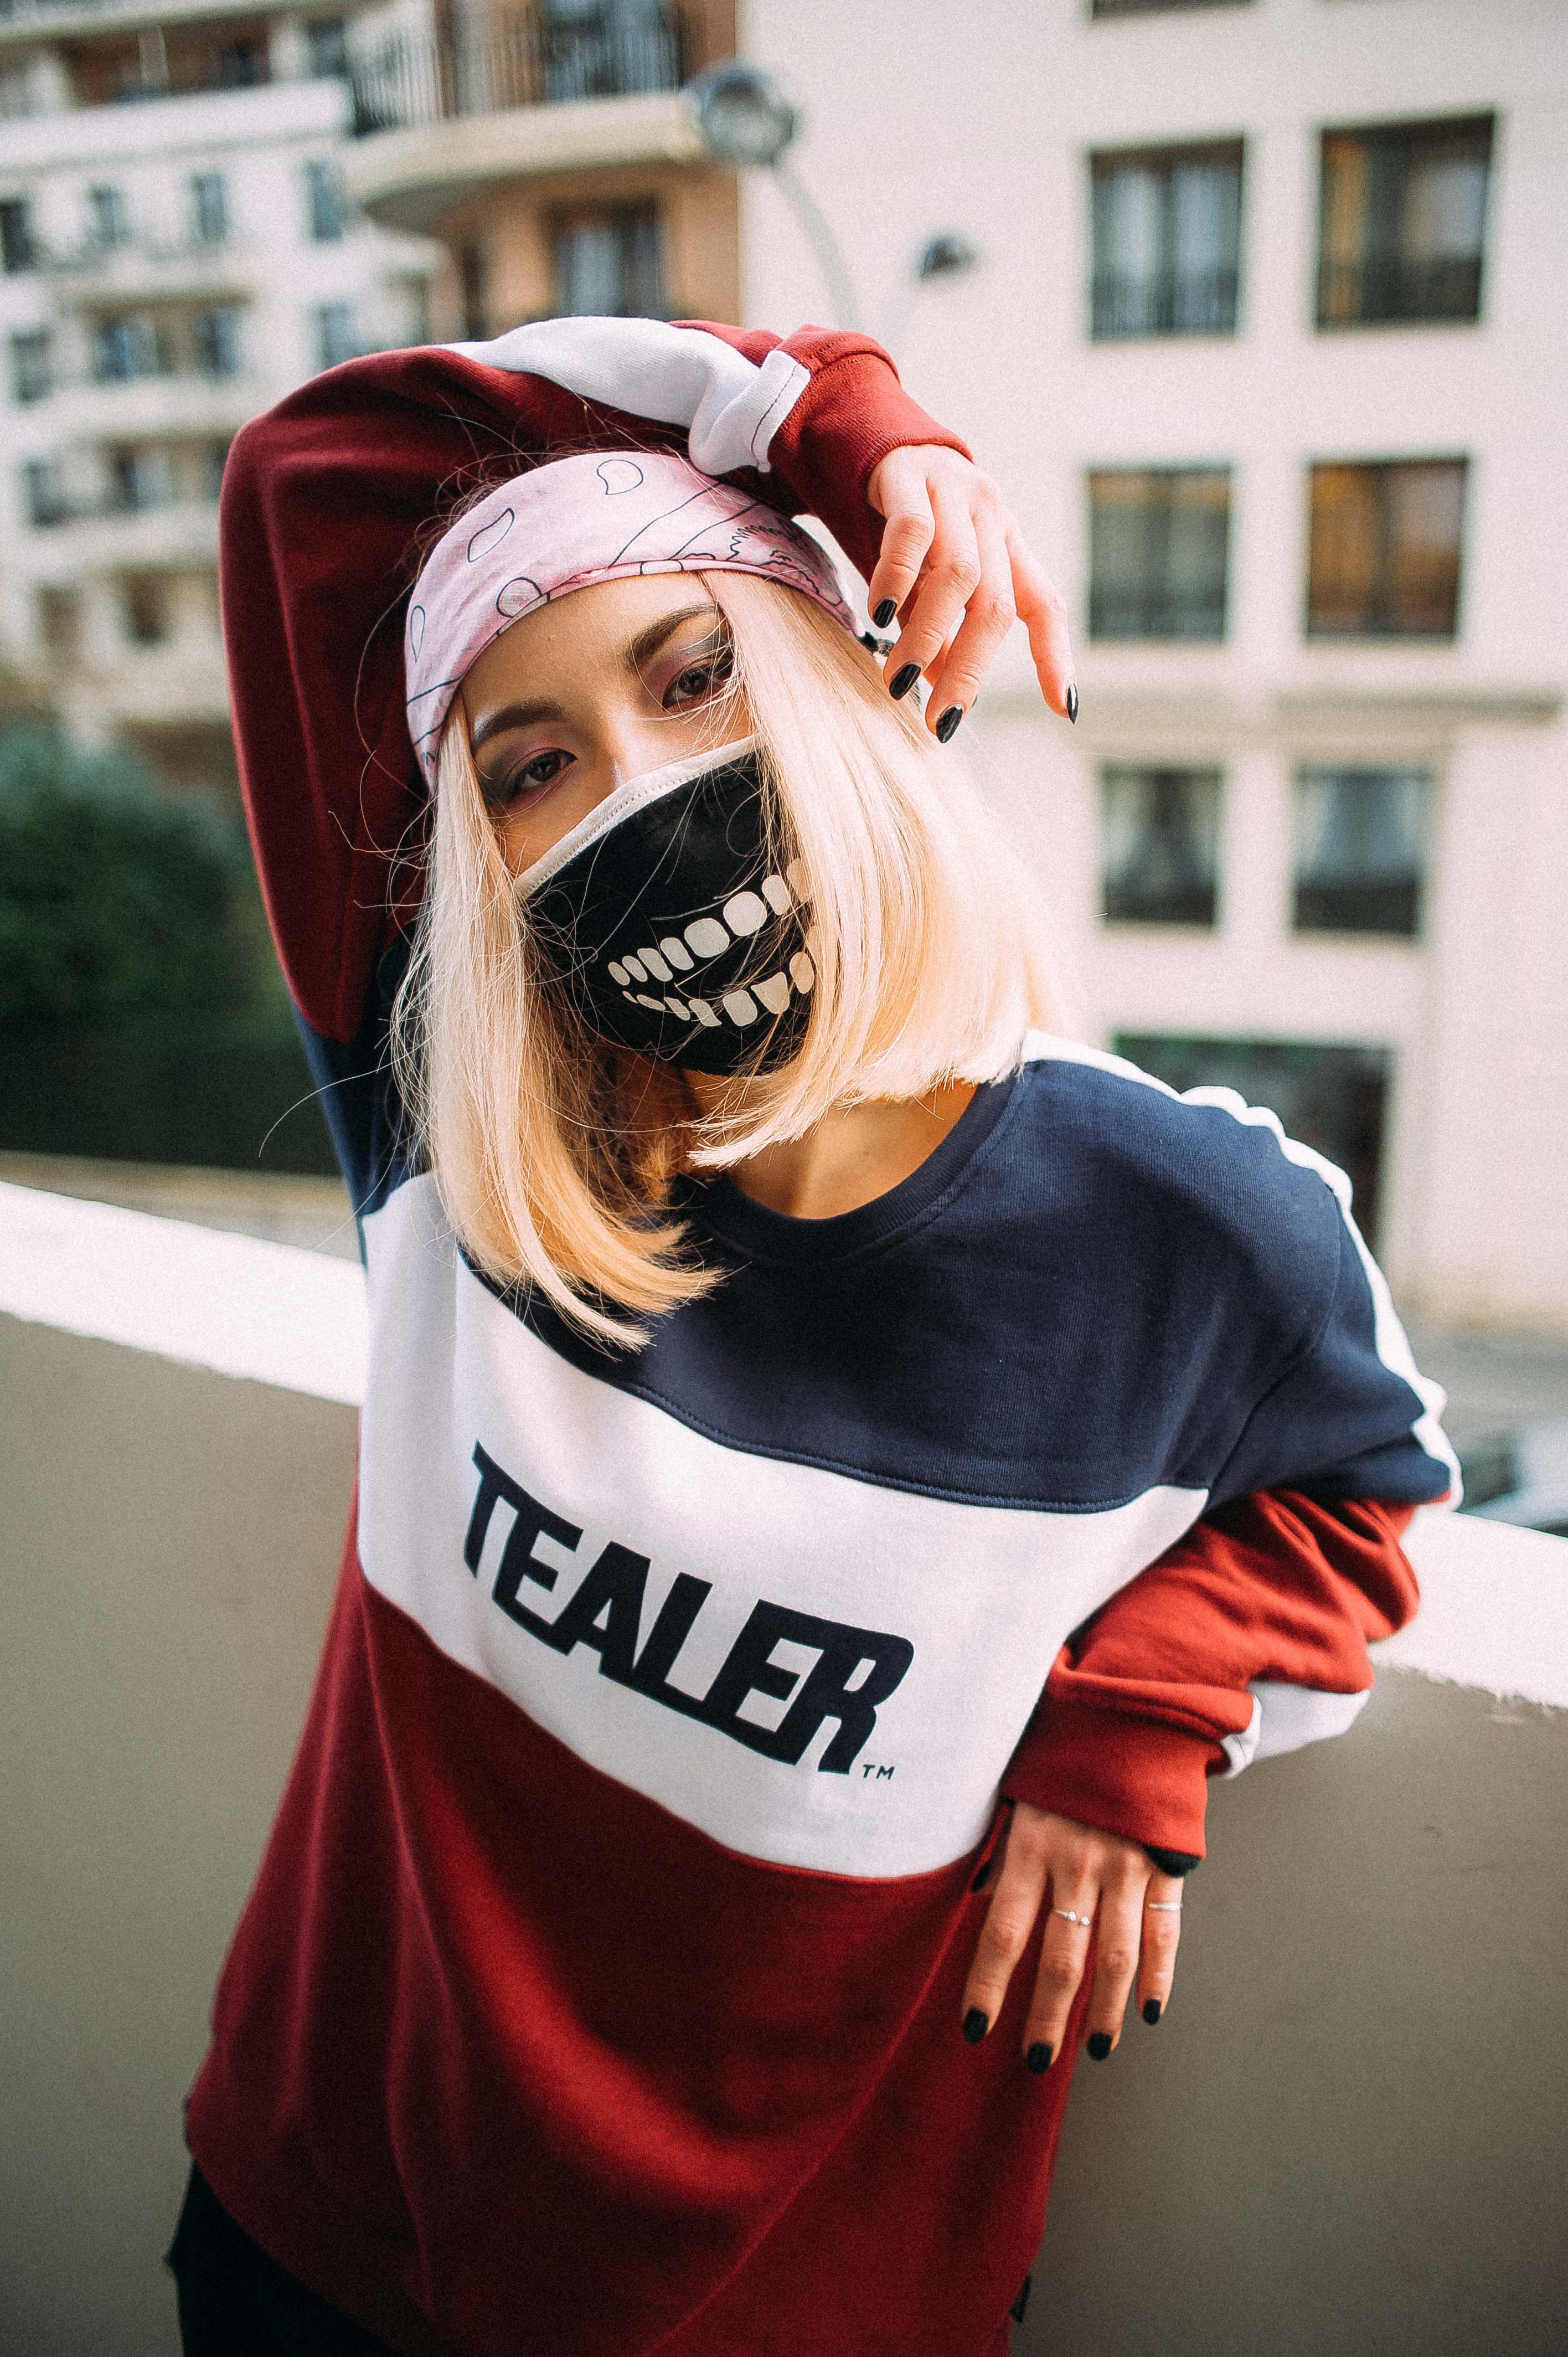 TEALER 2017 Fall Winter lookbook collection french paris tricolor branding sweaters hoodies pants